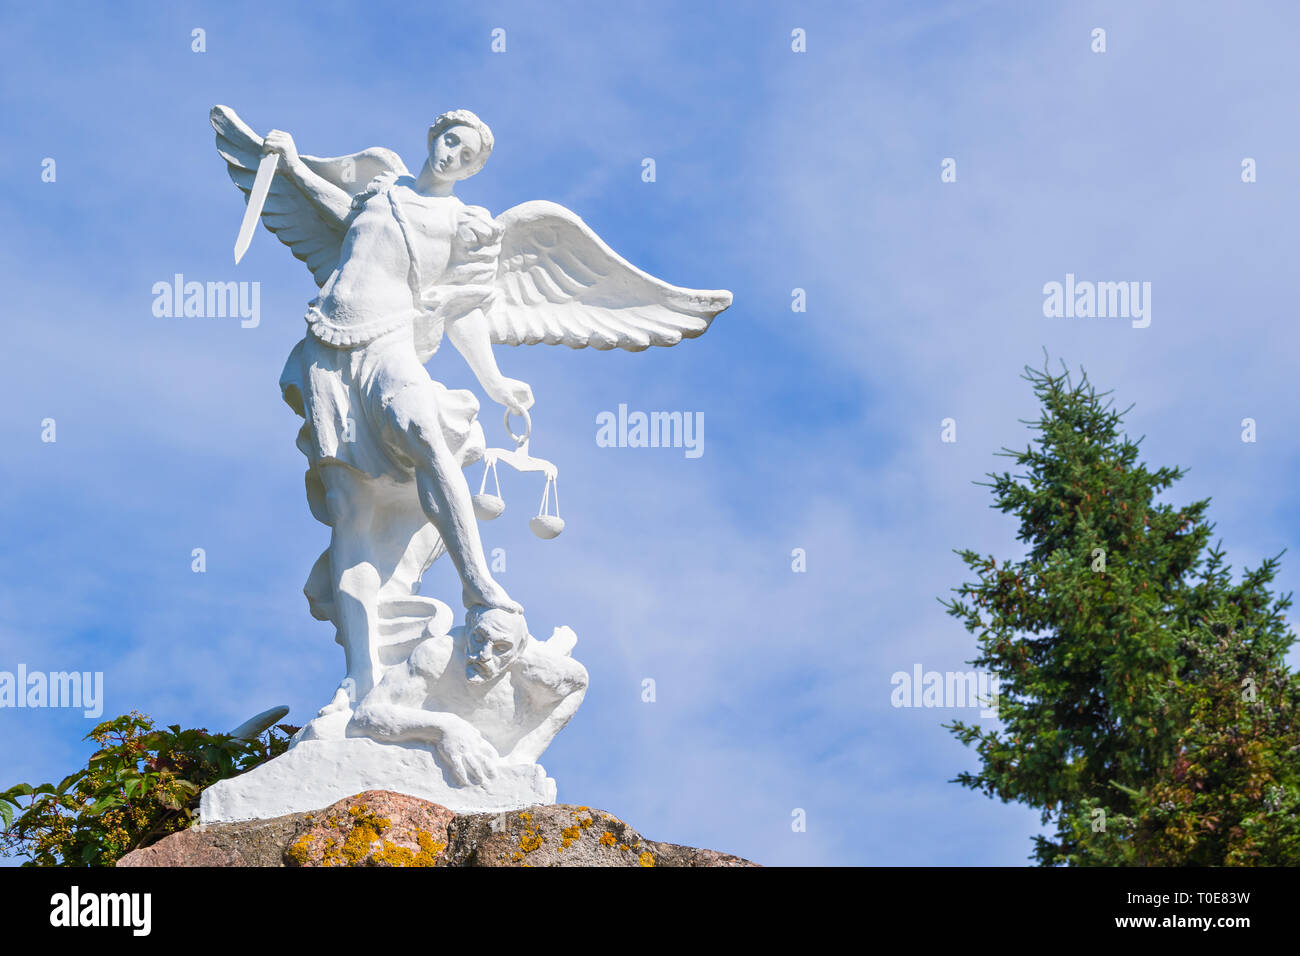 Sculpture of St. Michael the Archangel with a sword and libra striking devil Stock Photo